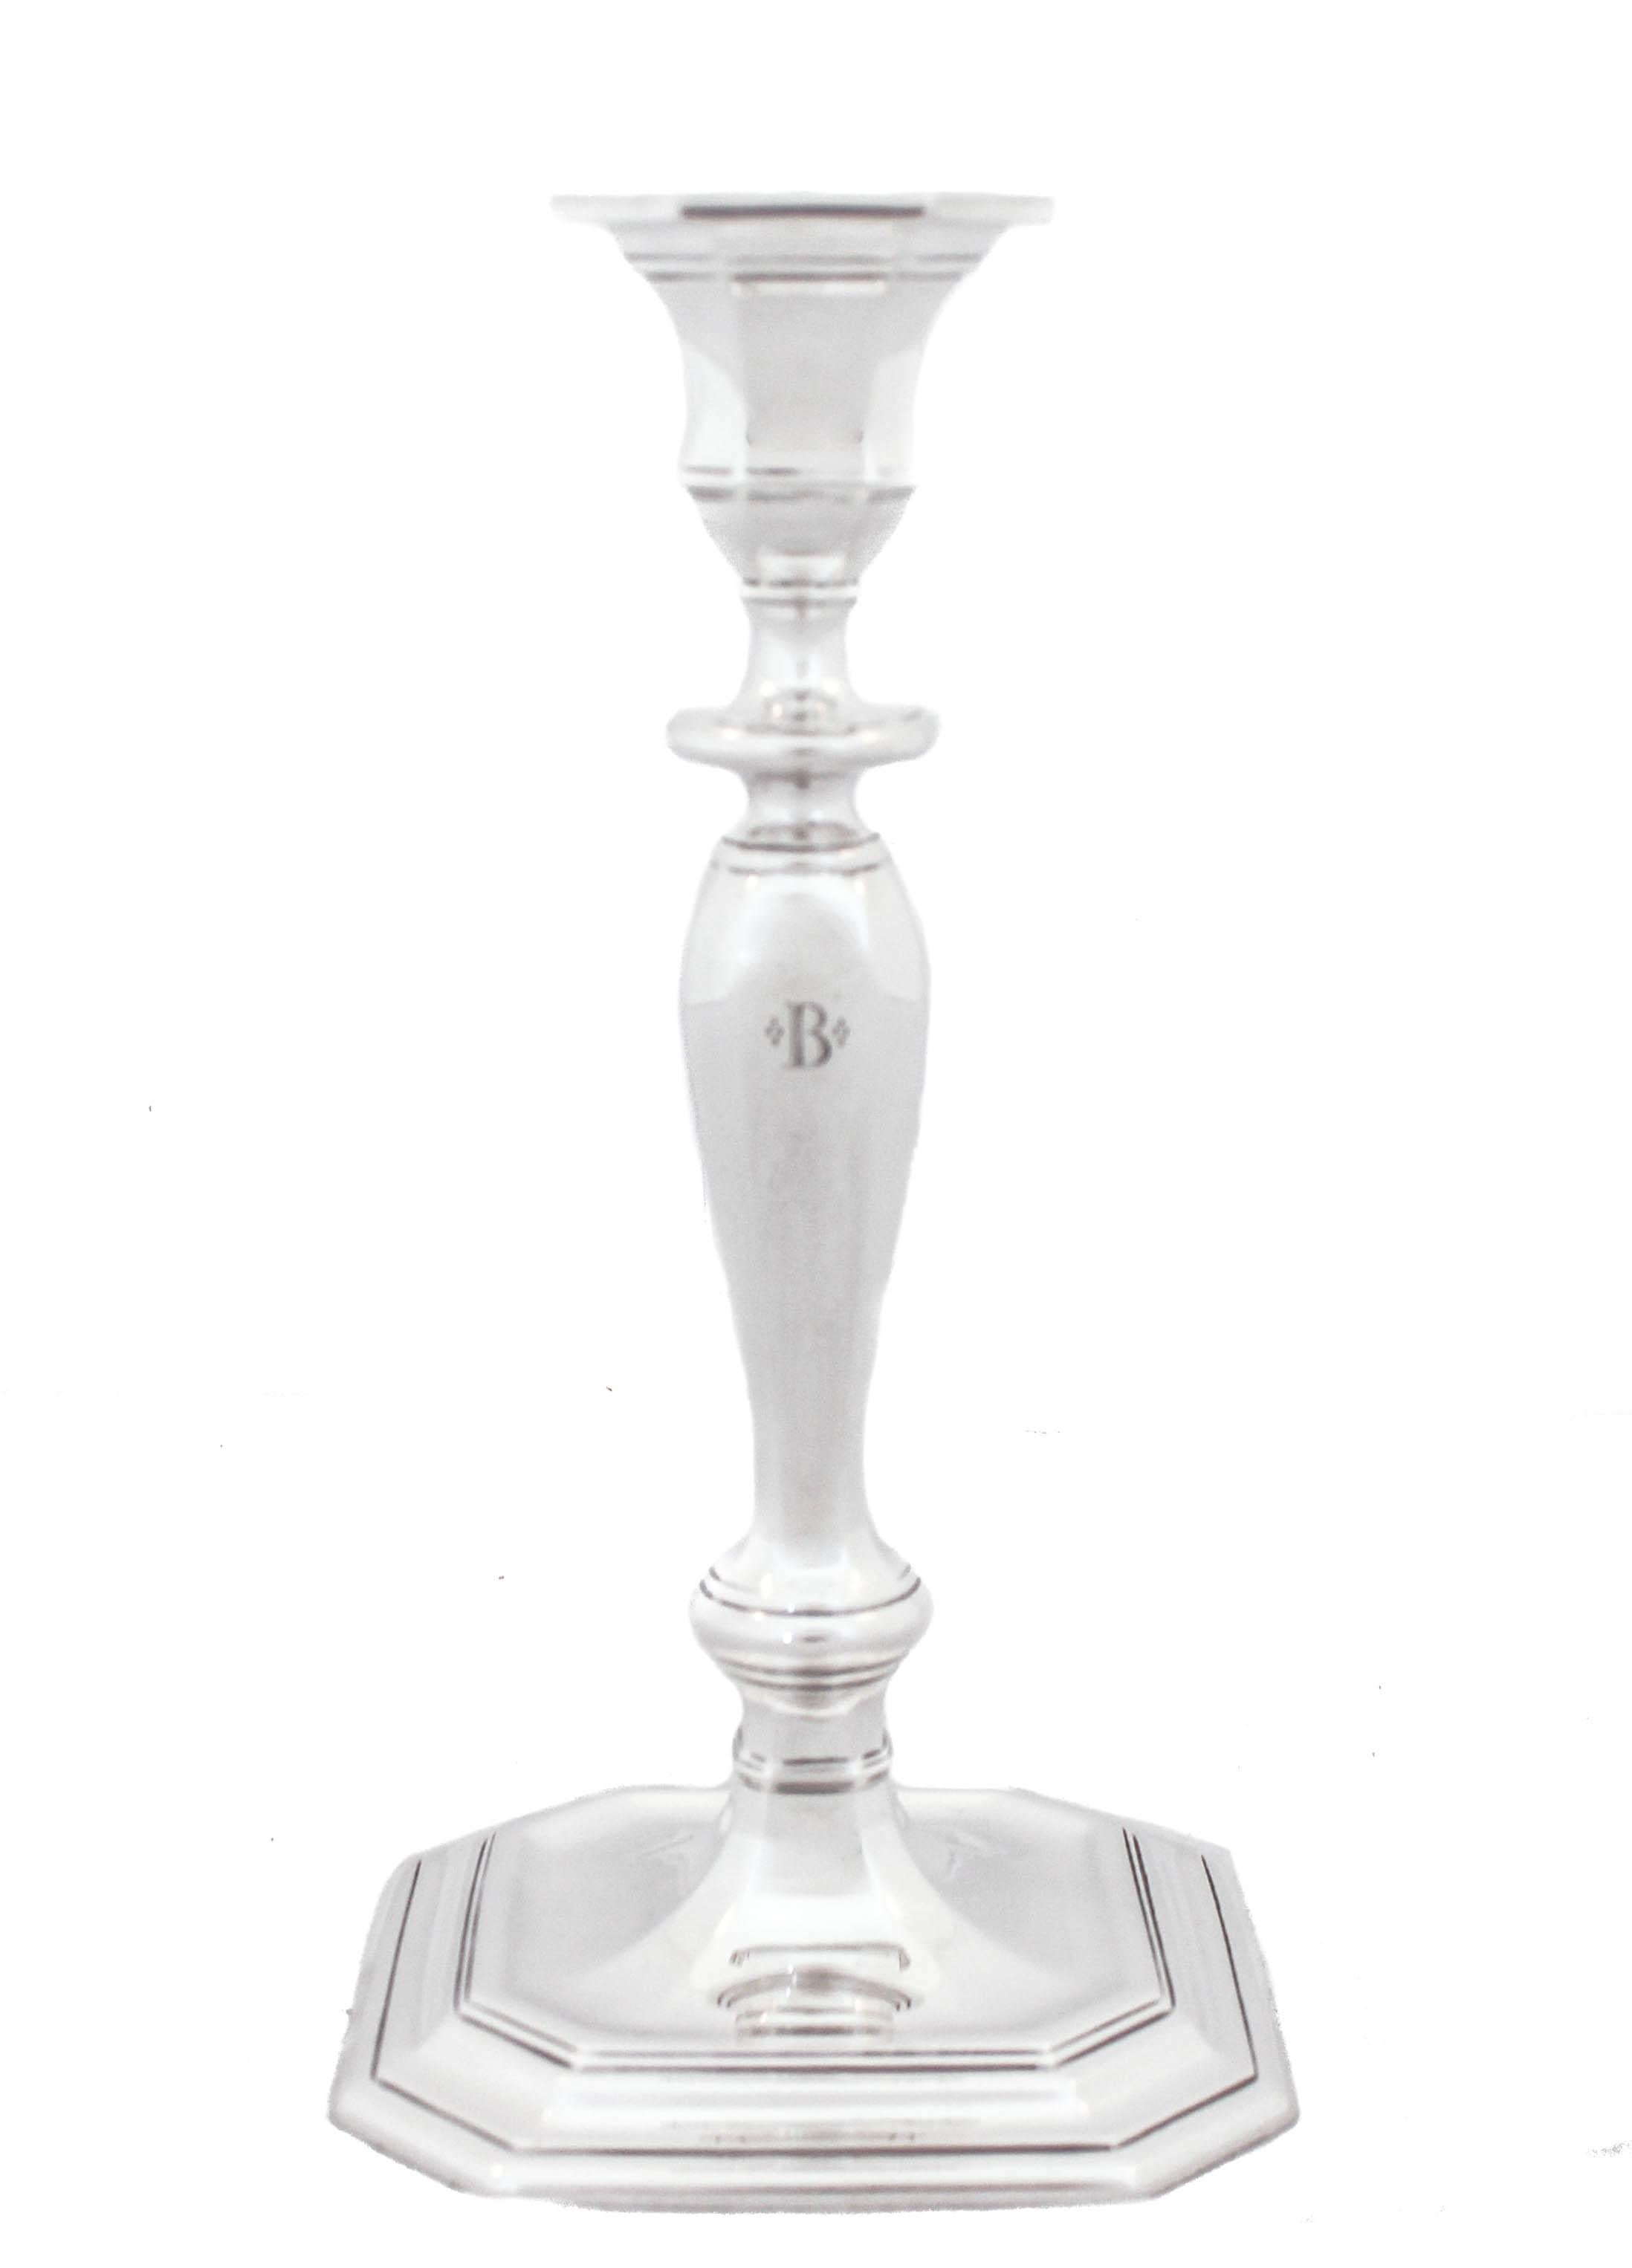 Being offered is a pair of sterling silver candlesticks by the world renowned Tiffany and Company.  Designed and manufactured during the post WWII period, the reflect the austere and understated style of that era.  The ornate and fussy style that